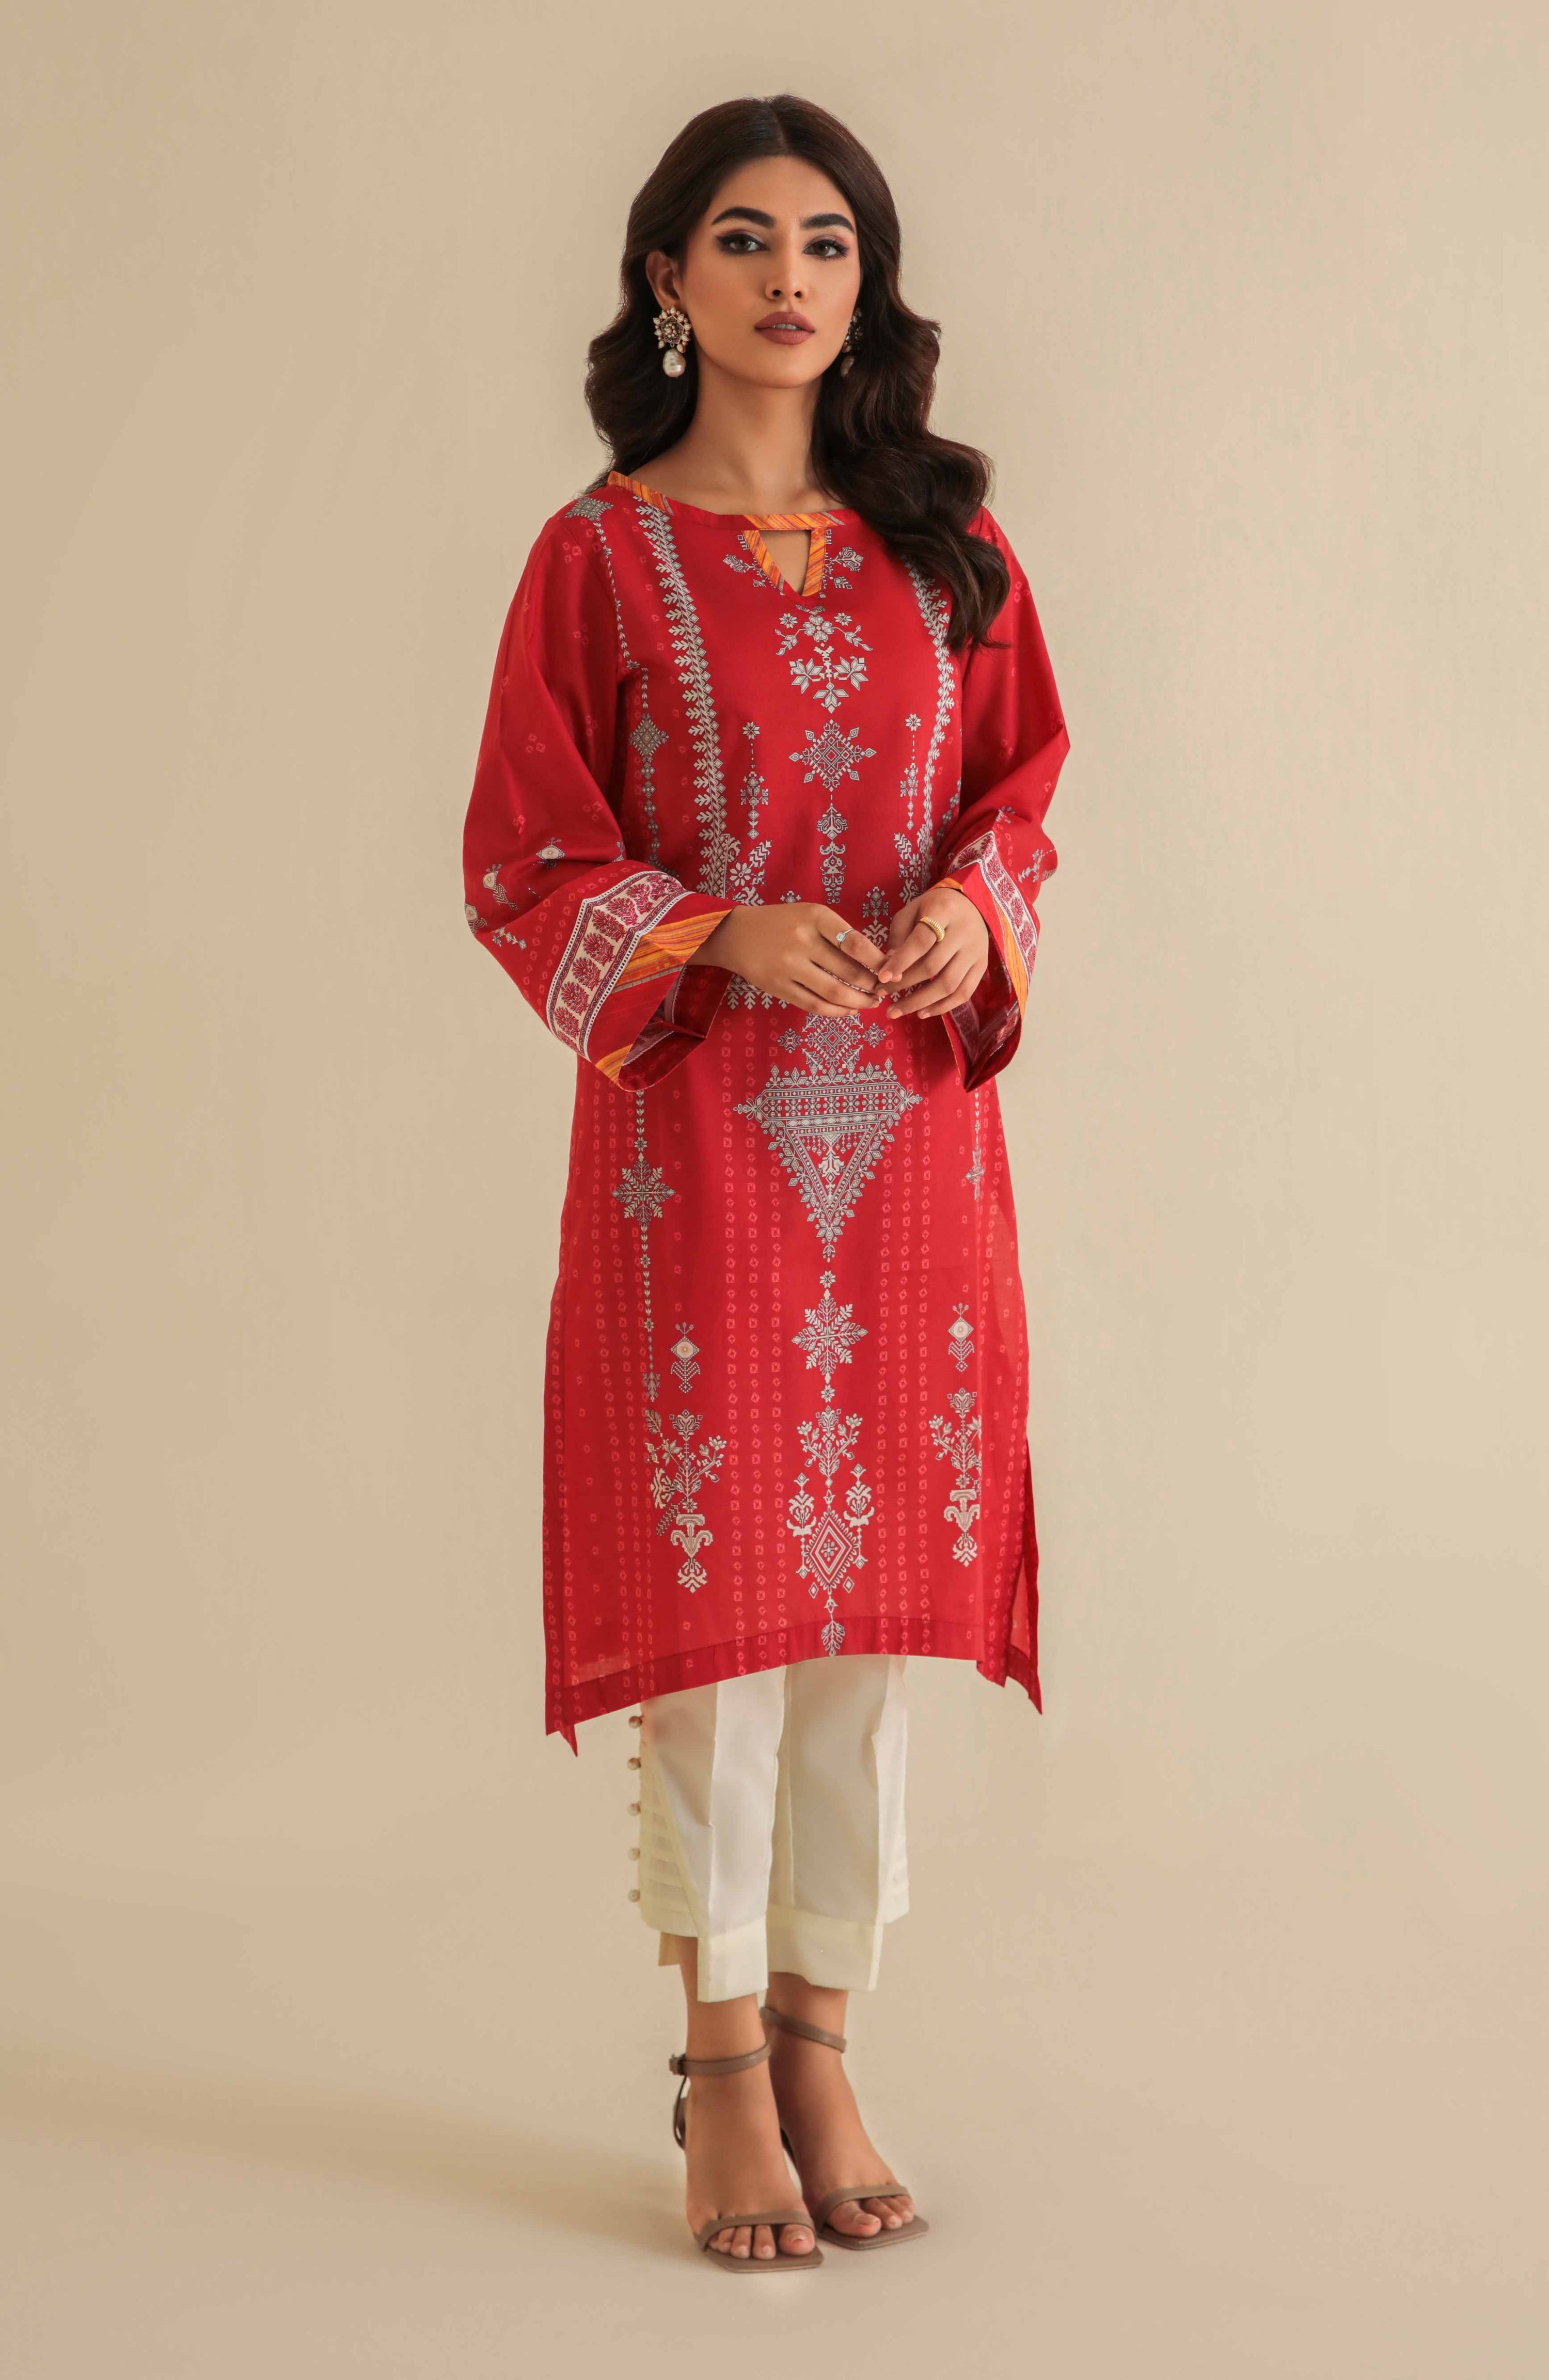 Formal Ready To Wear Pret For Girls In Red Color Digital Printed